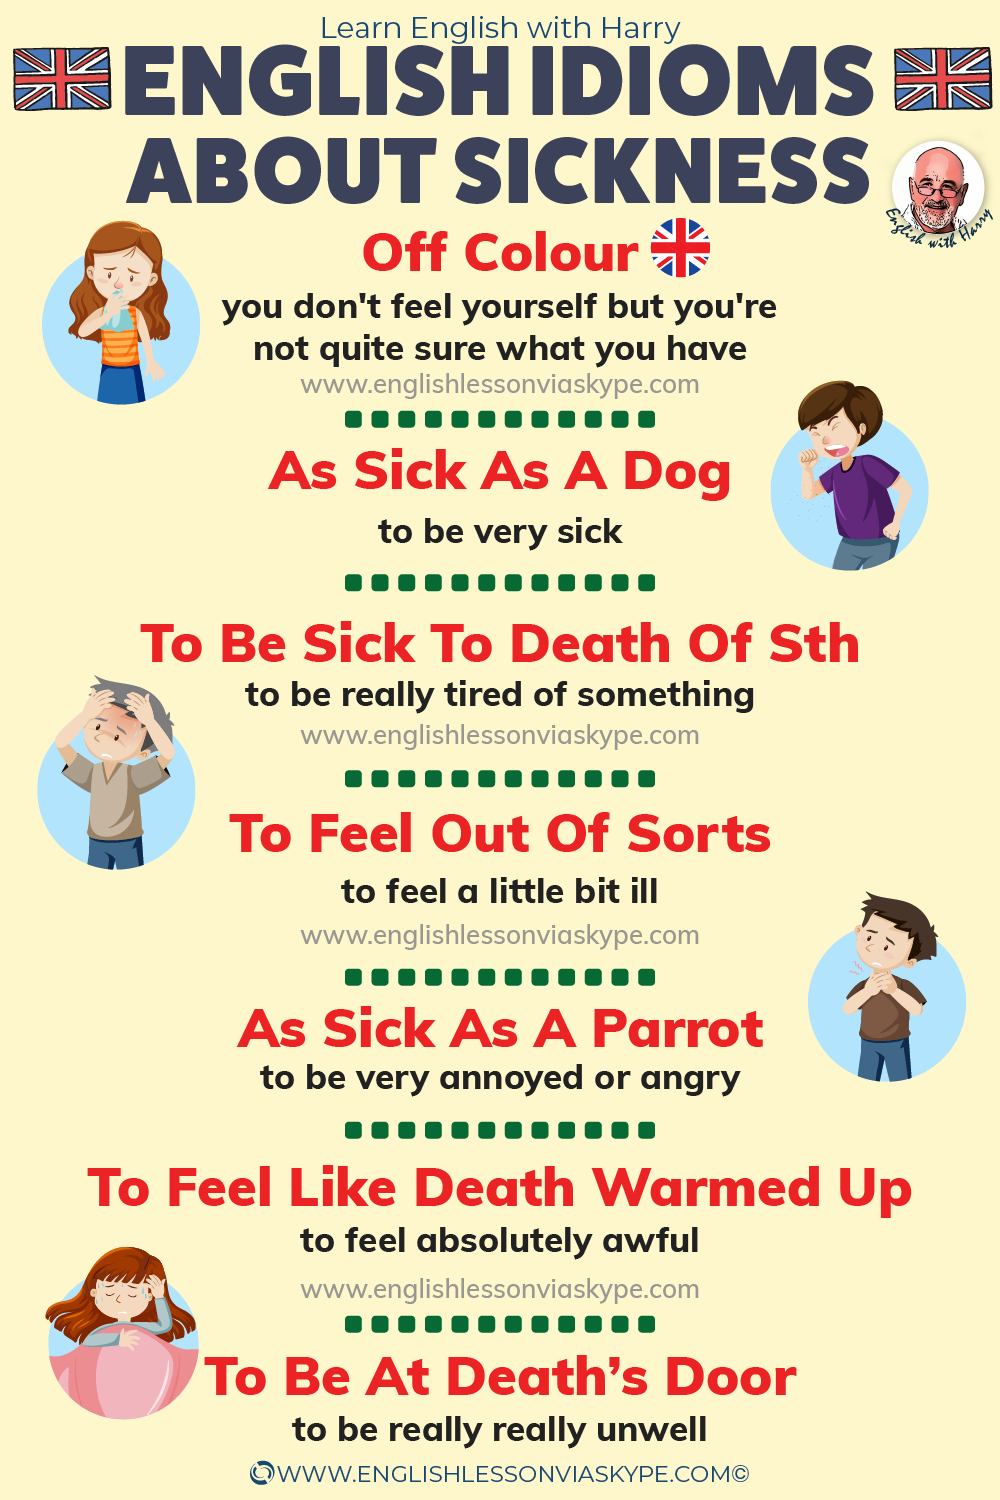 what is the meaning of the idiom sick as a dog